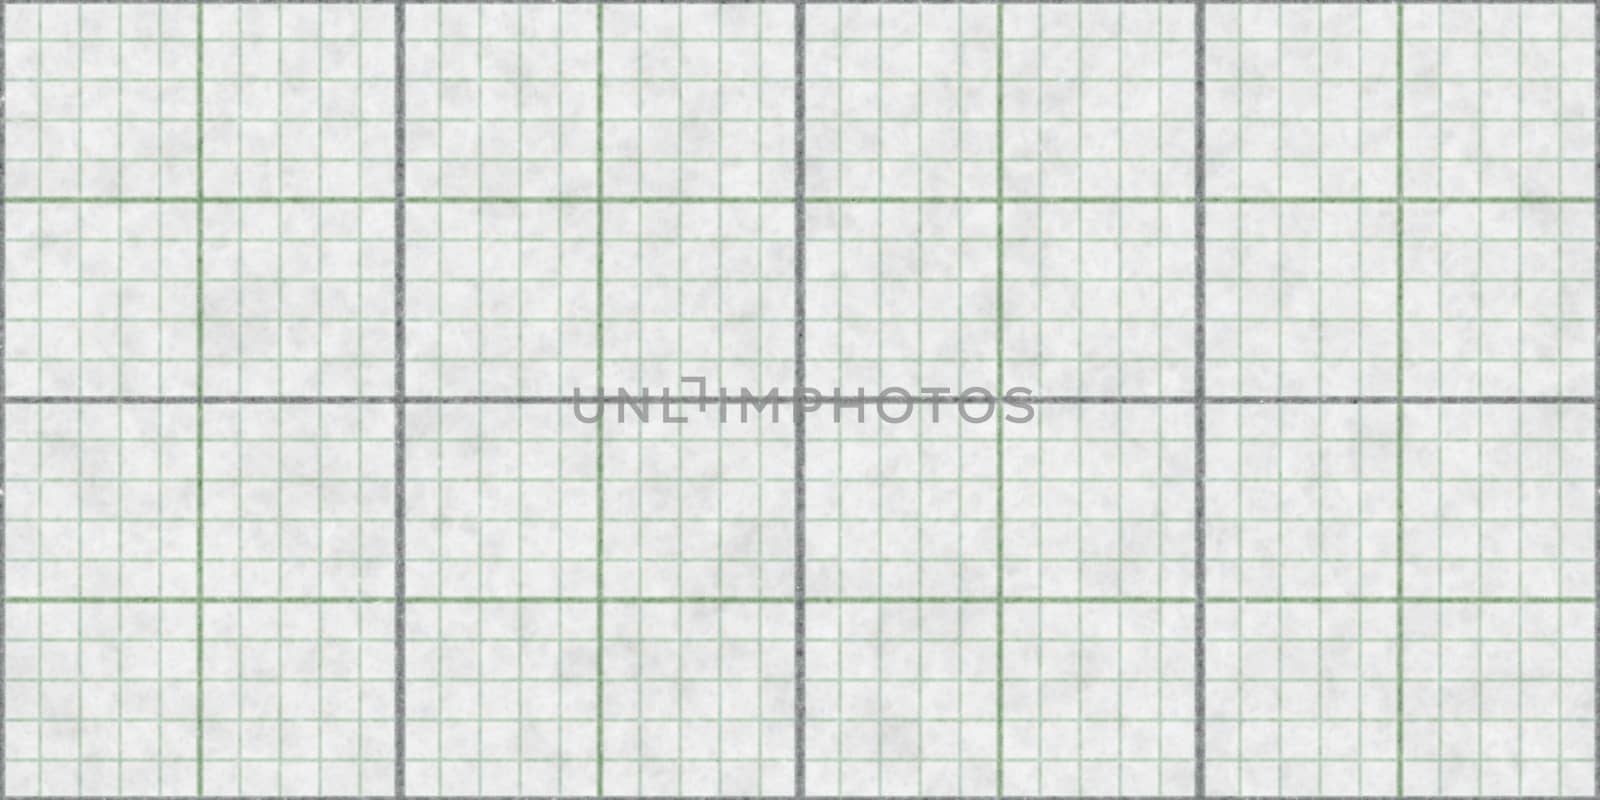 Gray Seamless Millimeter Paper Background. Tiling Graph Grid Texture. Empty Lined Pattern.